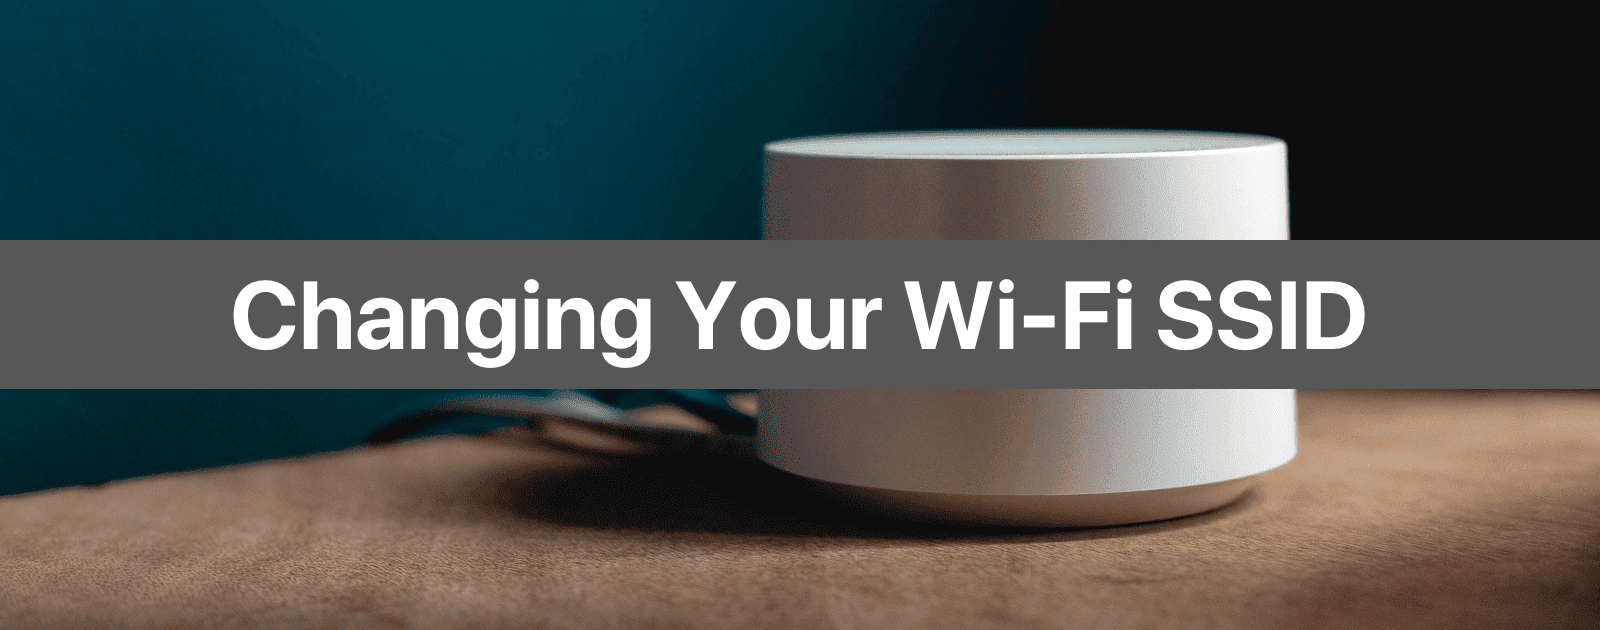 iOS: Don’t Use Spaces in Your Wi-Fi SSID Name